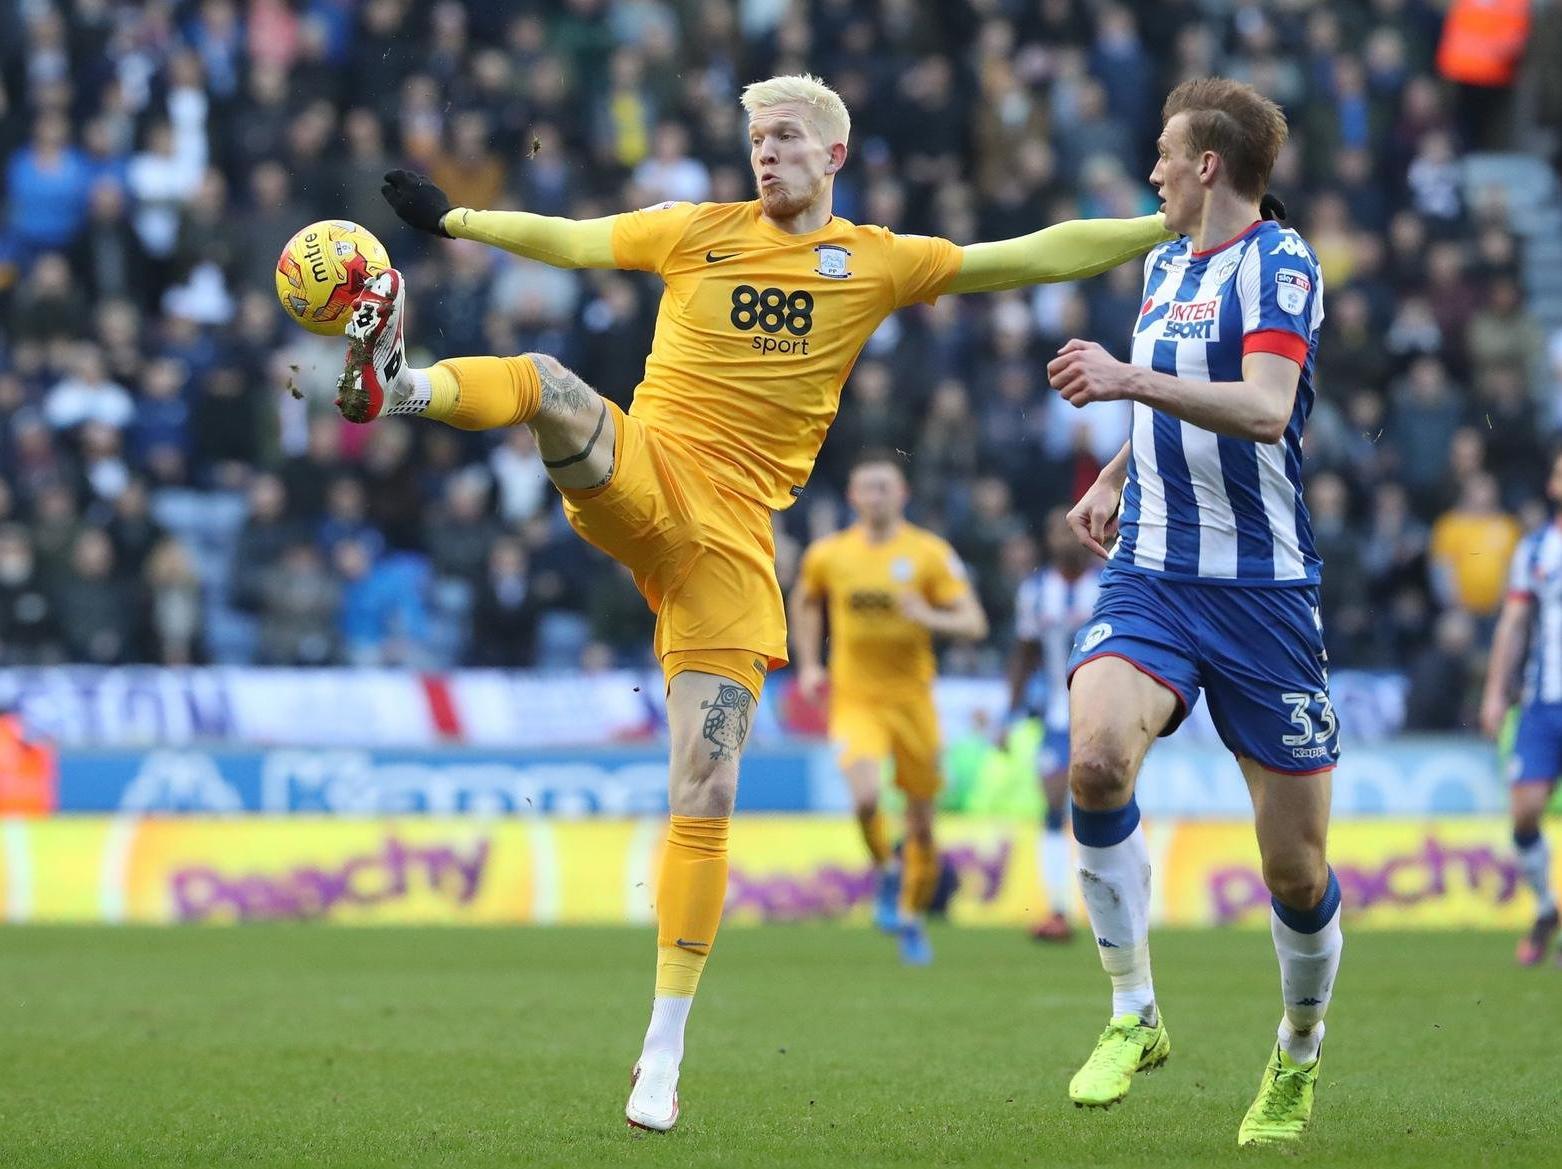 Preston striker Simon Makienok sticks out a long leg to get the ball in PNE's visit to the DW Stadium in February 2017